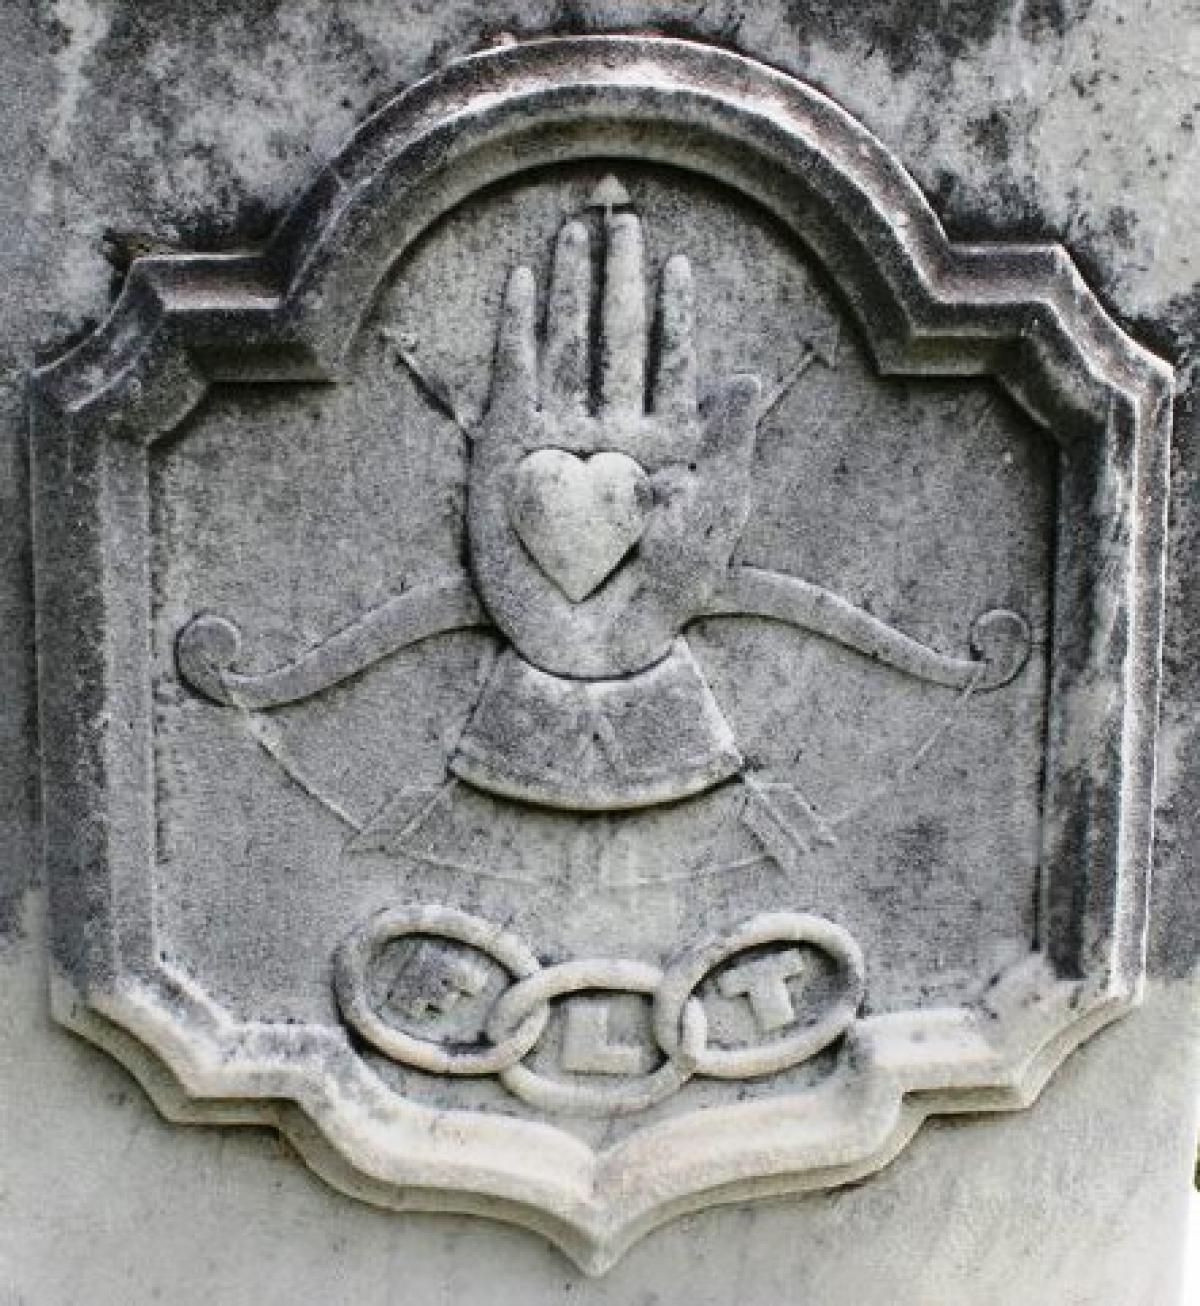 OK, Grove, Headstone Symbols and Meanings, Hand Holding Heart